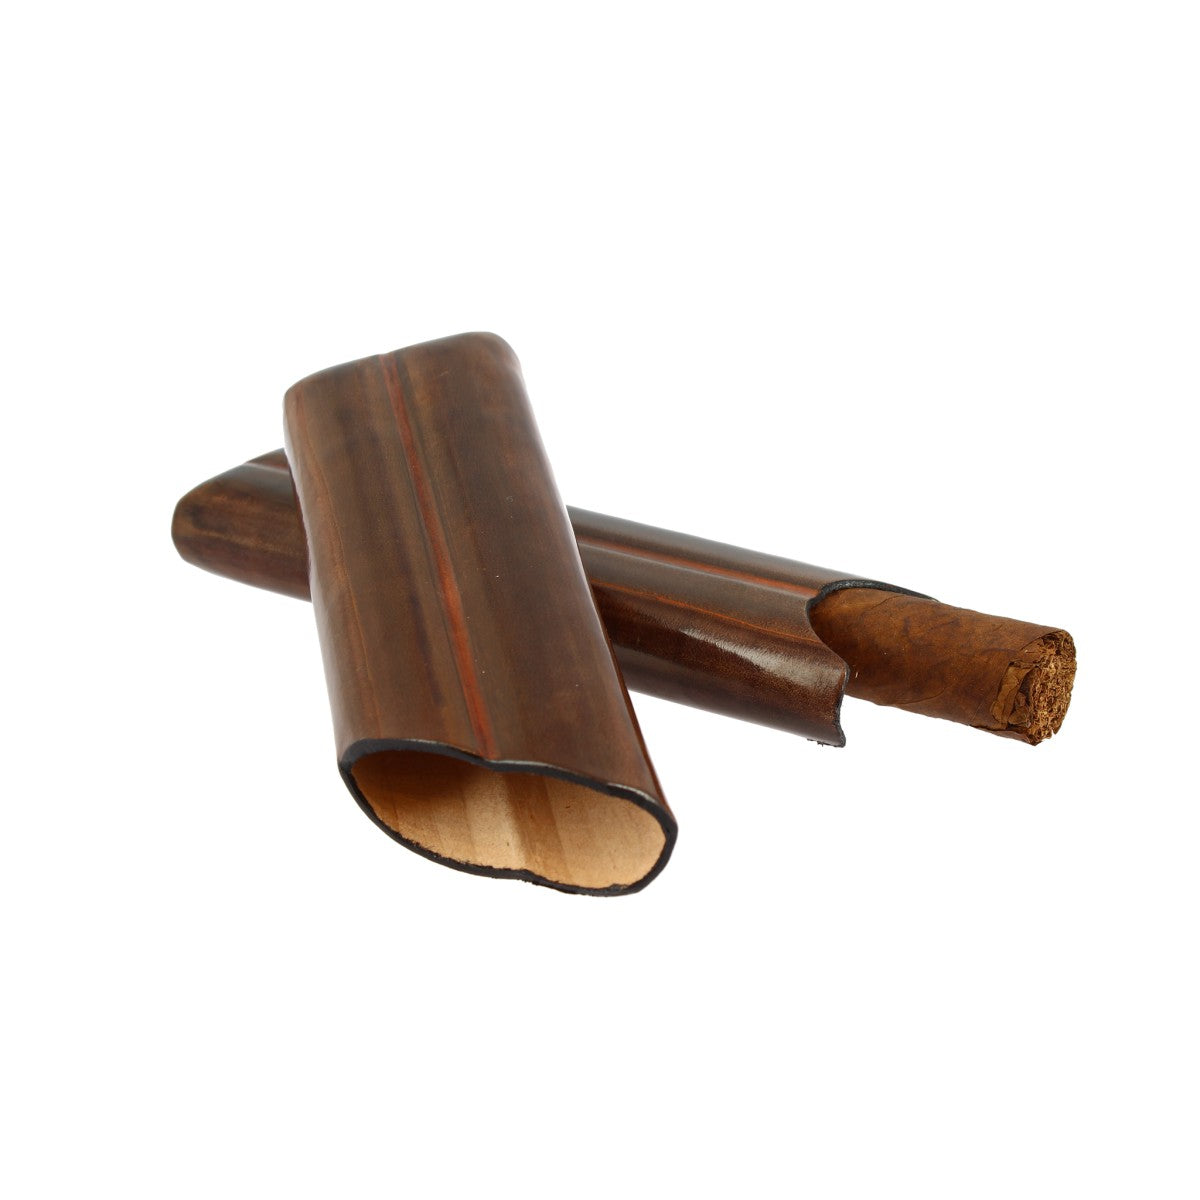 Pocket Cuban cigar holder made of leather available in various colors